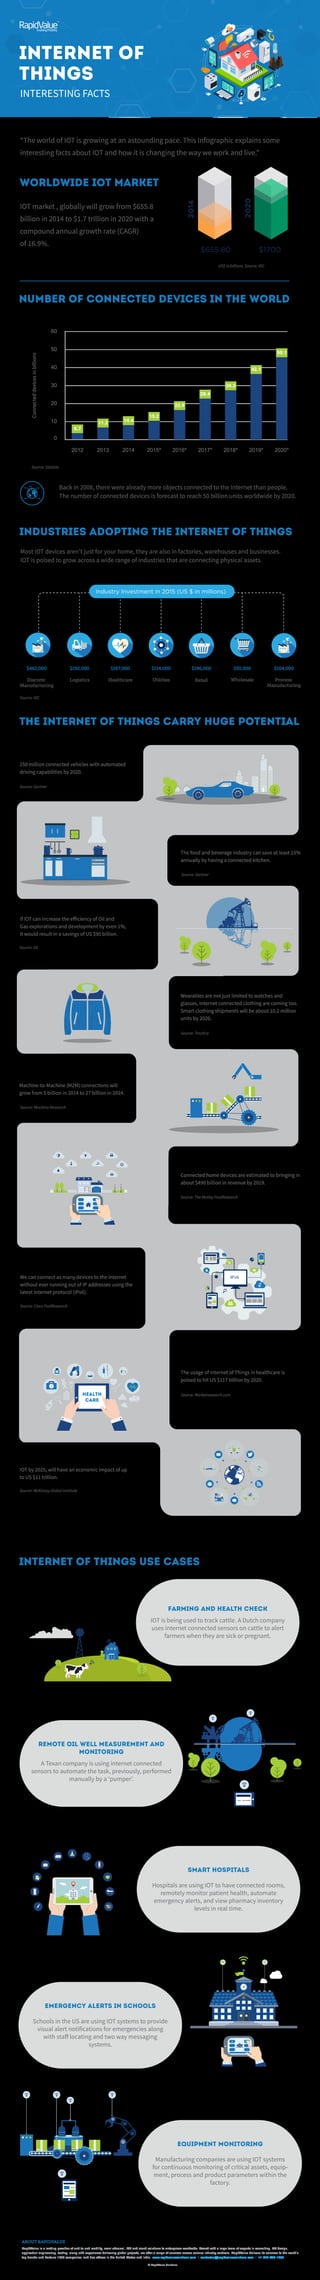 “The world of IOT is growing at an astounding pace. This Infographic explains some
interesting facts about IOT and how it is changing the way we work and live.”
IOT market , globally will grow from $655.8
billion in 2014 to $1.7 trillion in 2020 with a
compound annual growth rate (CAGR)
of 16.9%.
US$ in billions. Source: IDC
Worldwide IOT Market
$655.80
2014
2020 $1700
INTERESTING FACTS
INTERNET OF
THINGS
50
60
40
30
20
10
0
2012 2013 2014 2015* 2016* 2017* 2018* 2019* 2020*
8.7
11.2
14.4
15.2
22.9
28.4
34.3
42.1
50.1
Connecteddevicesinbillions
Number of Connected Devices in the World
Source: Statista
Back in 2008, there were already more objects connected to the Internet than people.
The number of connected devices is forecast to reach 50 billion units worldwide by 2020.
Industries Adopting the Internet of Things
Most IOT devices aren’t just for your home, they are also in factories, warehouses and businesses.
IOT is poised to grow across a wide range of industries that are connecting physical assets.
$192,000 $167,000 $114,000
Logistics Healthcare Utilities
Industry Investment in 2015 (US $ in millions)
$104,000
Process
Manufacturing
$462,000
Discrete
Manufacturing
$50,000
WholesaleRetail
$196,000
Source: IDC
The Internet of Things Carry Huge Potential
If IOT can increase the efficiency of Oil and
Gas explorations and development by even 1%,
it would result in a savings of US $90 billion.
Wearables are not just limited to watches and
glasses, internet connected clothing are coming too.
Smart clothing shipments will be about 10.2 million
units by 2020.
Machine-to-Machine (M2M) connections will
grow from 5 billion in 2014 to 27 billion in 2024.
Connected home devices are estimated to bringing in
about $490 billion in revenue by 2019.
HEALTH
care
250 million connected vehicles with automated
driving capabilities by 2020.
Source: Gartner
The food and beverage industry can save at least 15%
annually by having a connected kitchen.
Source: Gartner
Source: GE
Source: Tractica
Source: The Motley FoolResearch
The usage of Internet of Things in healthcare is
poised to hit US $117 billion by 2020.
Source: Marketresearch.com
HEALTH
care
IOT by 2025, will have an economic impact of up
to US $11 trillion.
Source: McKinsey Global Institute
INternet Of Things Use Cases
Farming and Health Check
IOT is being used to track cattle. A Dutch company
uses internet connected sensors on cattle to alert
farmers when they are sick or pregnant.
Remote Oil Well Measurement and
Monitoring
A Texan company is using internet connected
sensors to automate the task, previously, performed
manually by a ‘pumper’.
Smart Hospitals
Hospitals are using IOT to have connected rooms,
remotely monitor patient health, automate
emergency alerts, and view pharmacy inventory
levels in real time.
Emergency Alerts in schools
Schools in the US are using IOT systems to provide
visual alert notifications for emergencies along
with staff locating and two way messaging
systems.
Source: Machina Research
IPv6We can connect as many devices to the internet
without ever running out of IP addresses using the
latest internet protocol (IPv6).
Source: Cisco FoolResearch
ABOUT RAPIDVALUE
RapidValue is a leading provider of end-to-end mobility, omni-channel, IOT and cloud solutions to enterprises worldwide. Armed with a large team of experts in consulting, UX design,
application engineering, testing, along with experience delivering global projects, we offer a range of services across various industry verticals. RapidValue delivers its services to the
world’s top brands and Fortune 1000 companies, and has offices in the United States, the United Kingdom and India.
www.rapidvaluesolutions.com | contactus@rapidvaluesolutions.com | +1-877-643-1850
© RapidValue Solutions
Equipment Monitoring
Manufacturing companies are using IOT systems
for continuous monitoring of critical assets, equip-
ment, process and product parameters within the
factory.
 